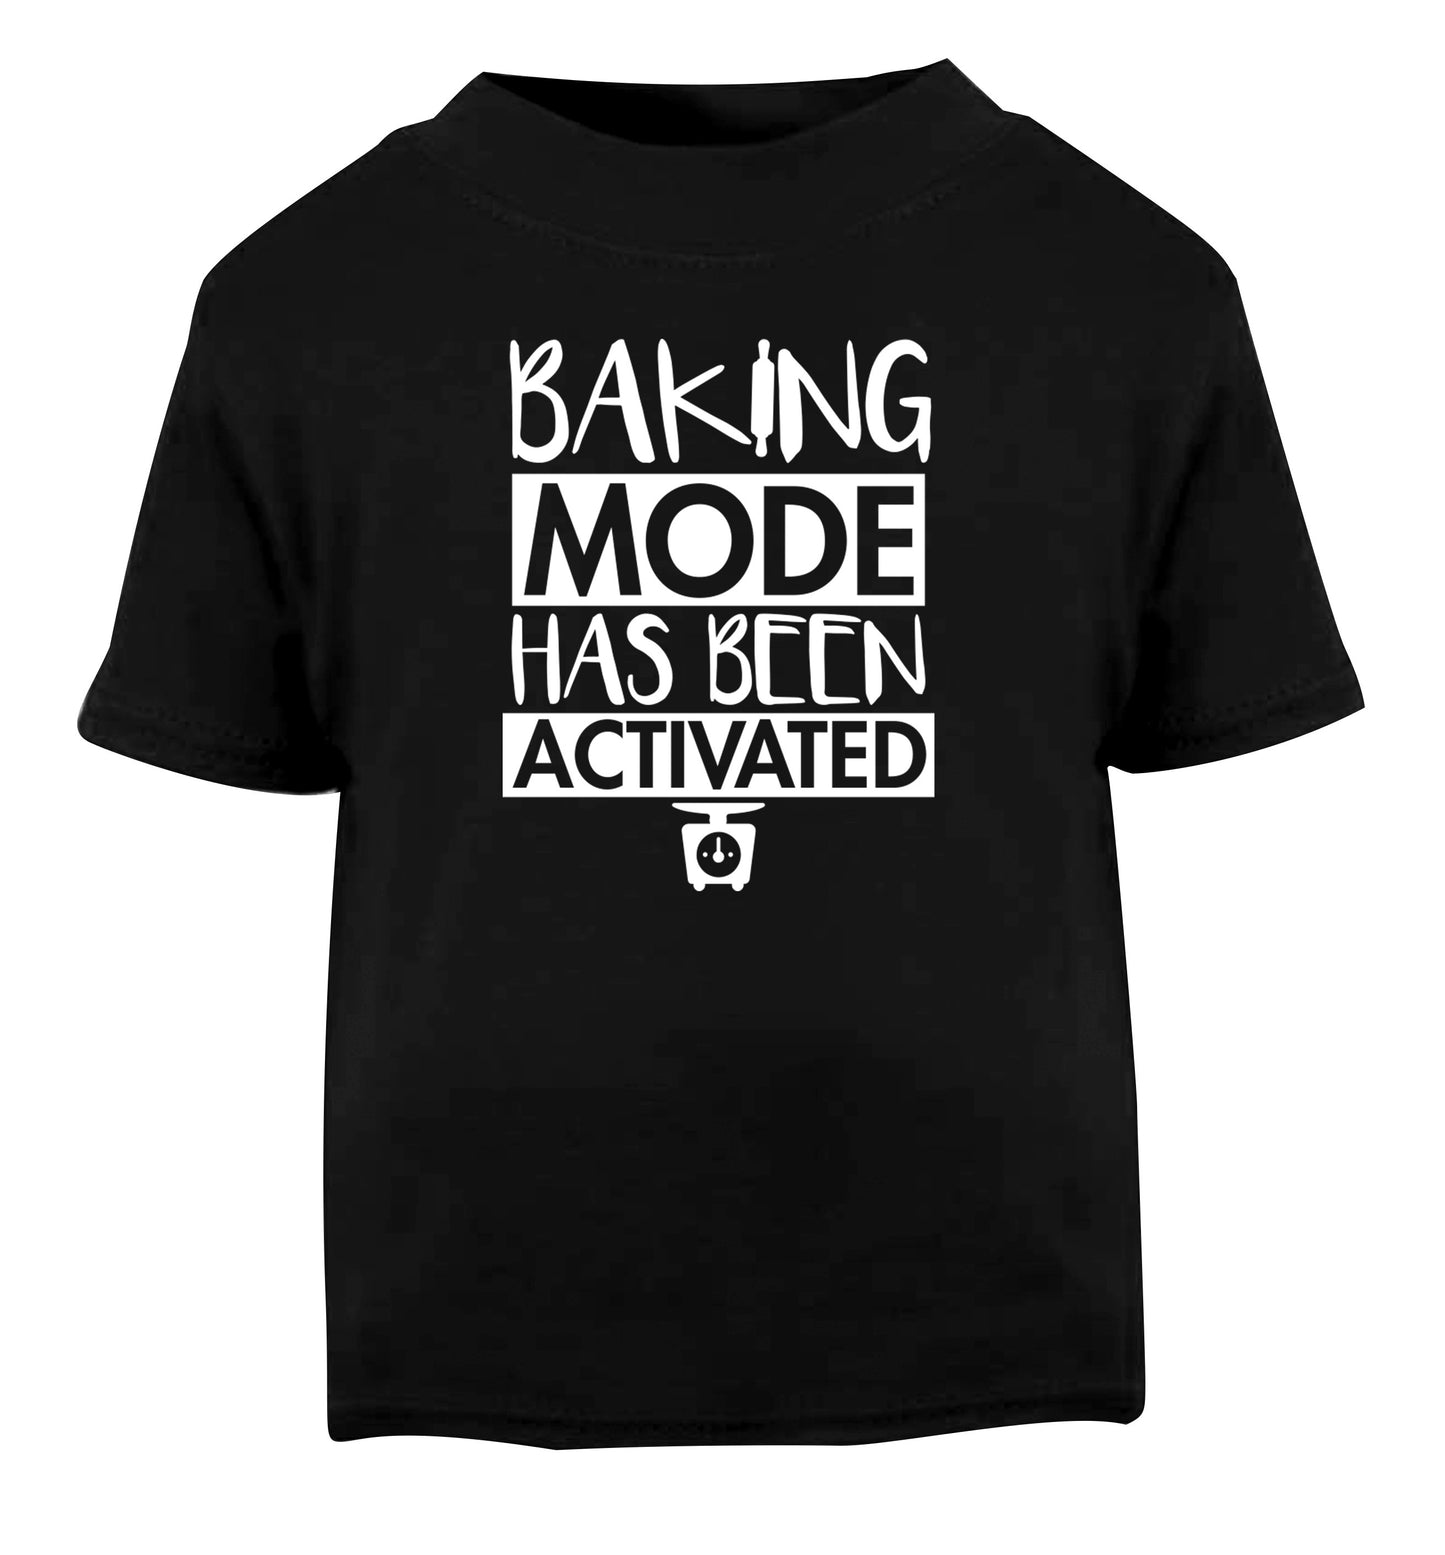 Baking mode has been activated Black Baby Toddler Tshirt 2 years